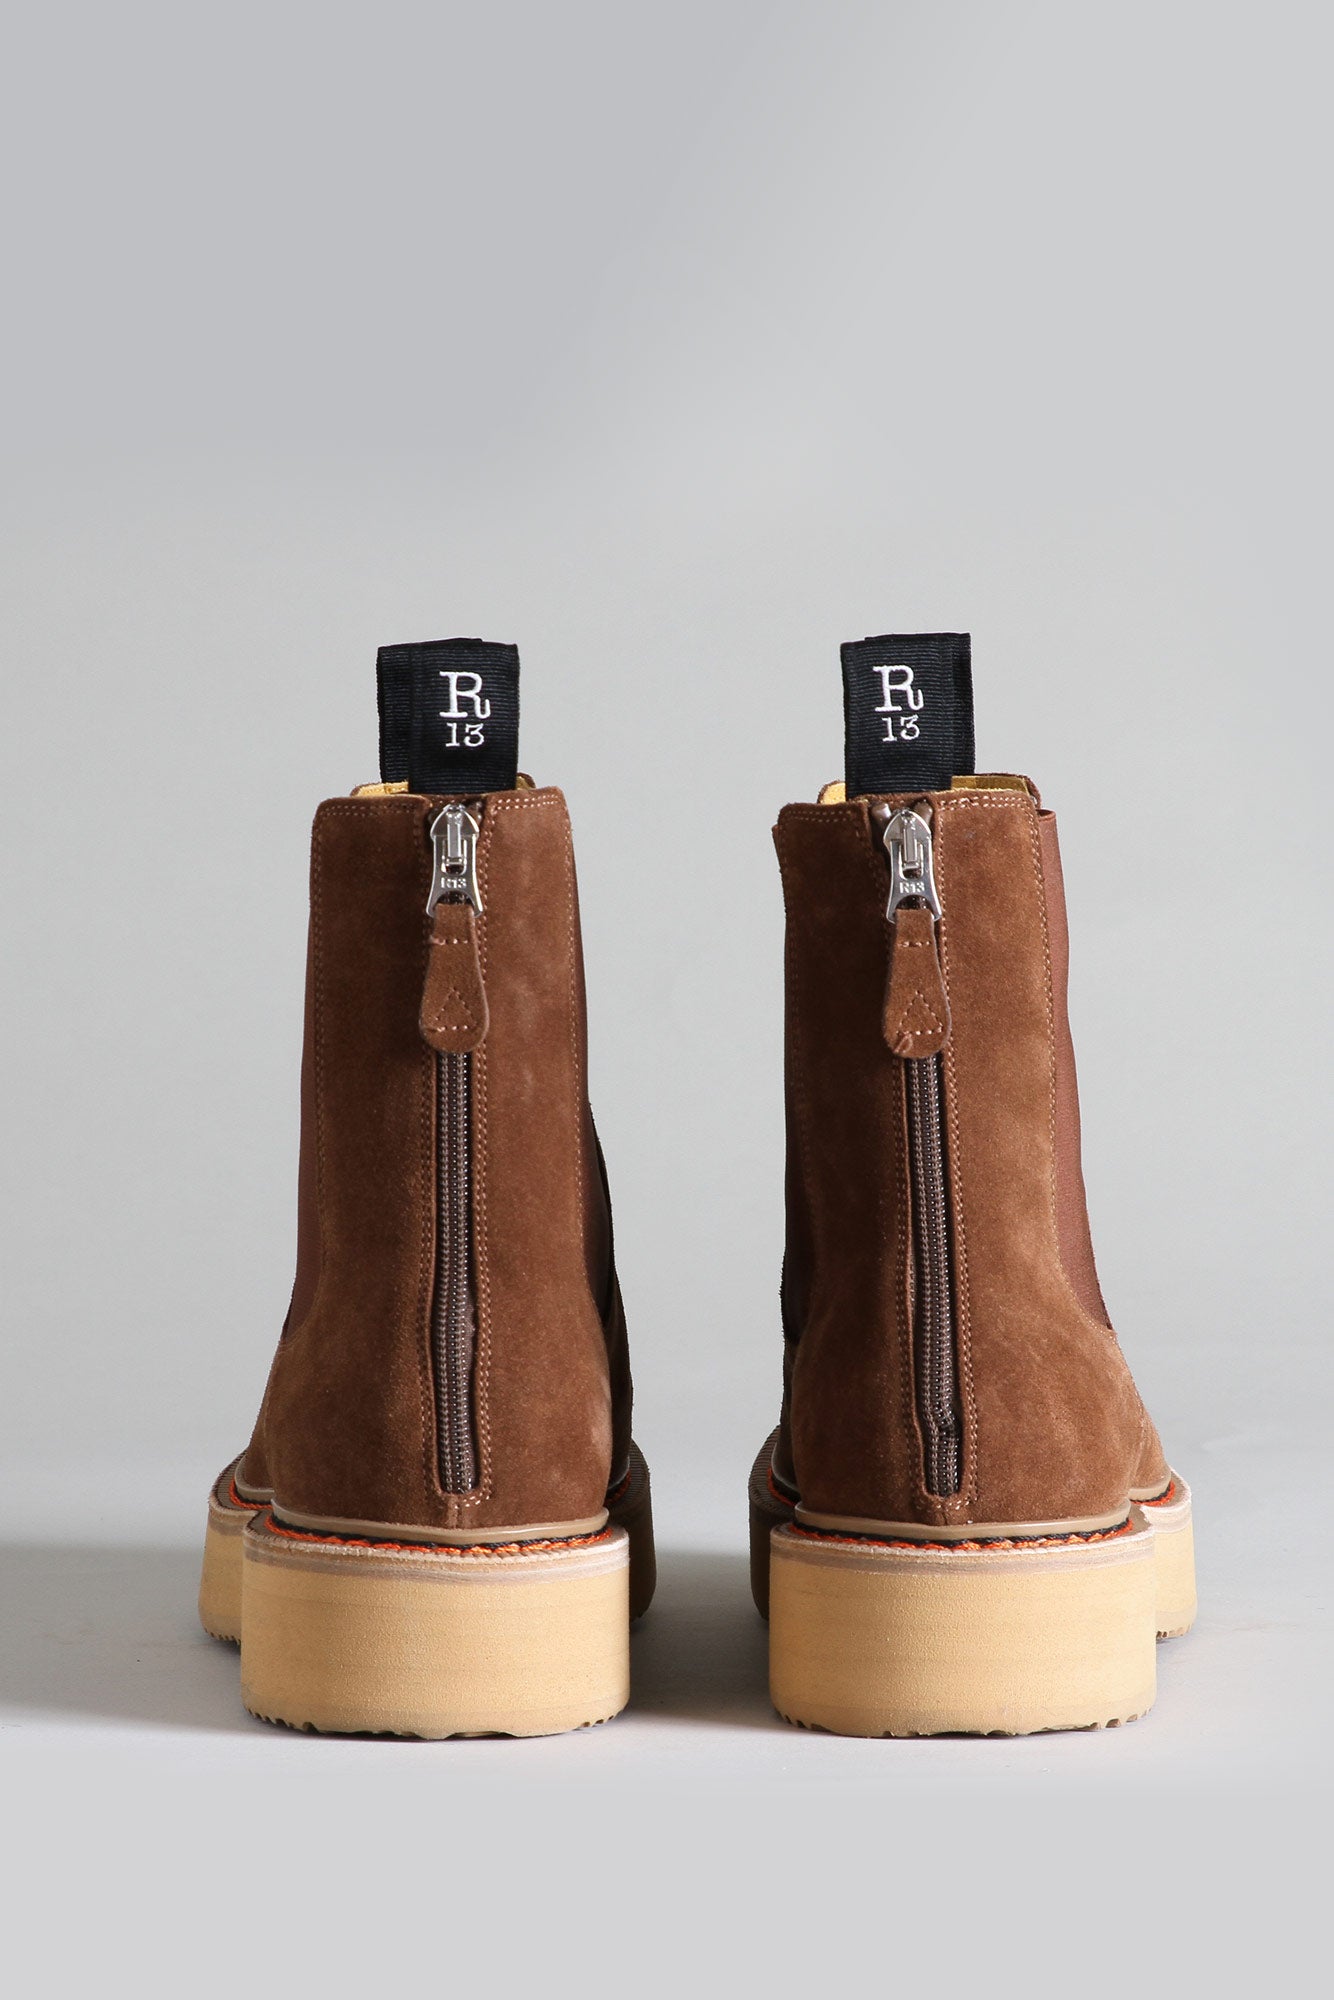 SINGLE STACK CHELSEA BOOT - BROWN SUEDE